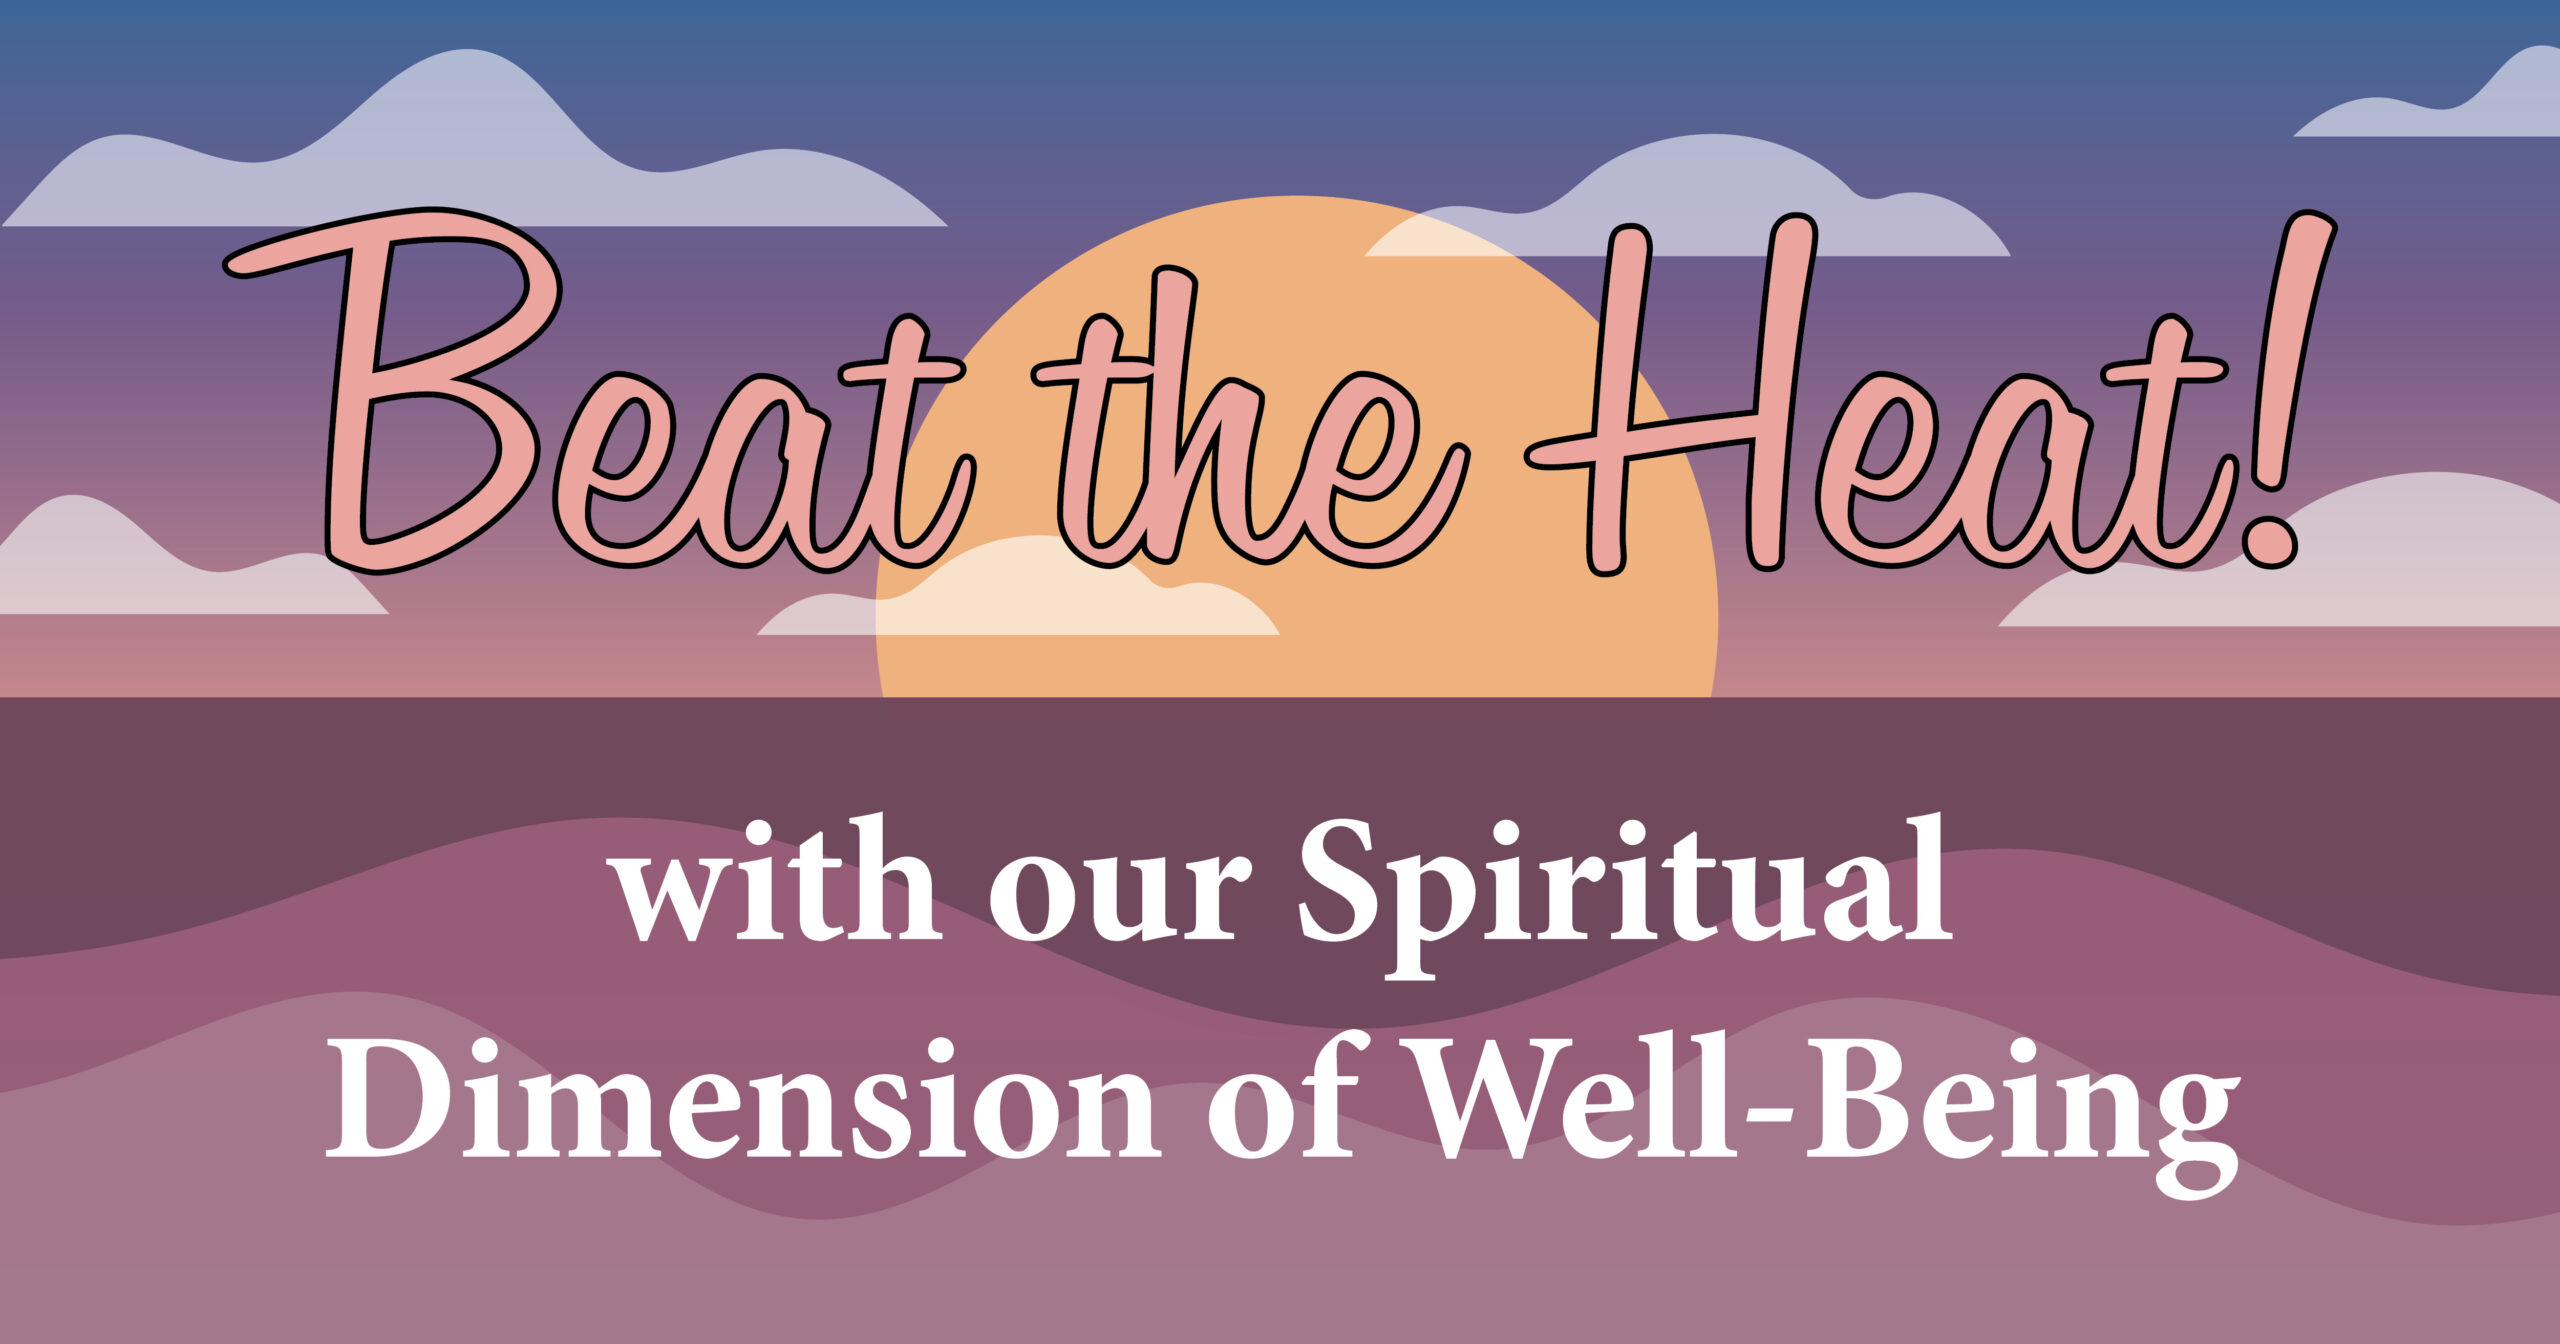 Beat The Heat With Our Spiritual Dimension of Wellbeing